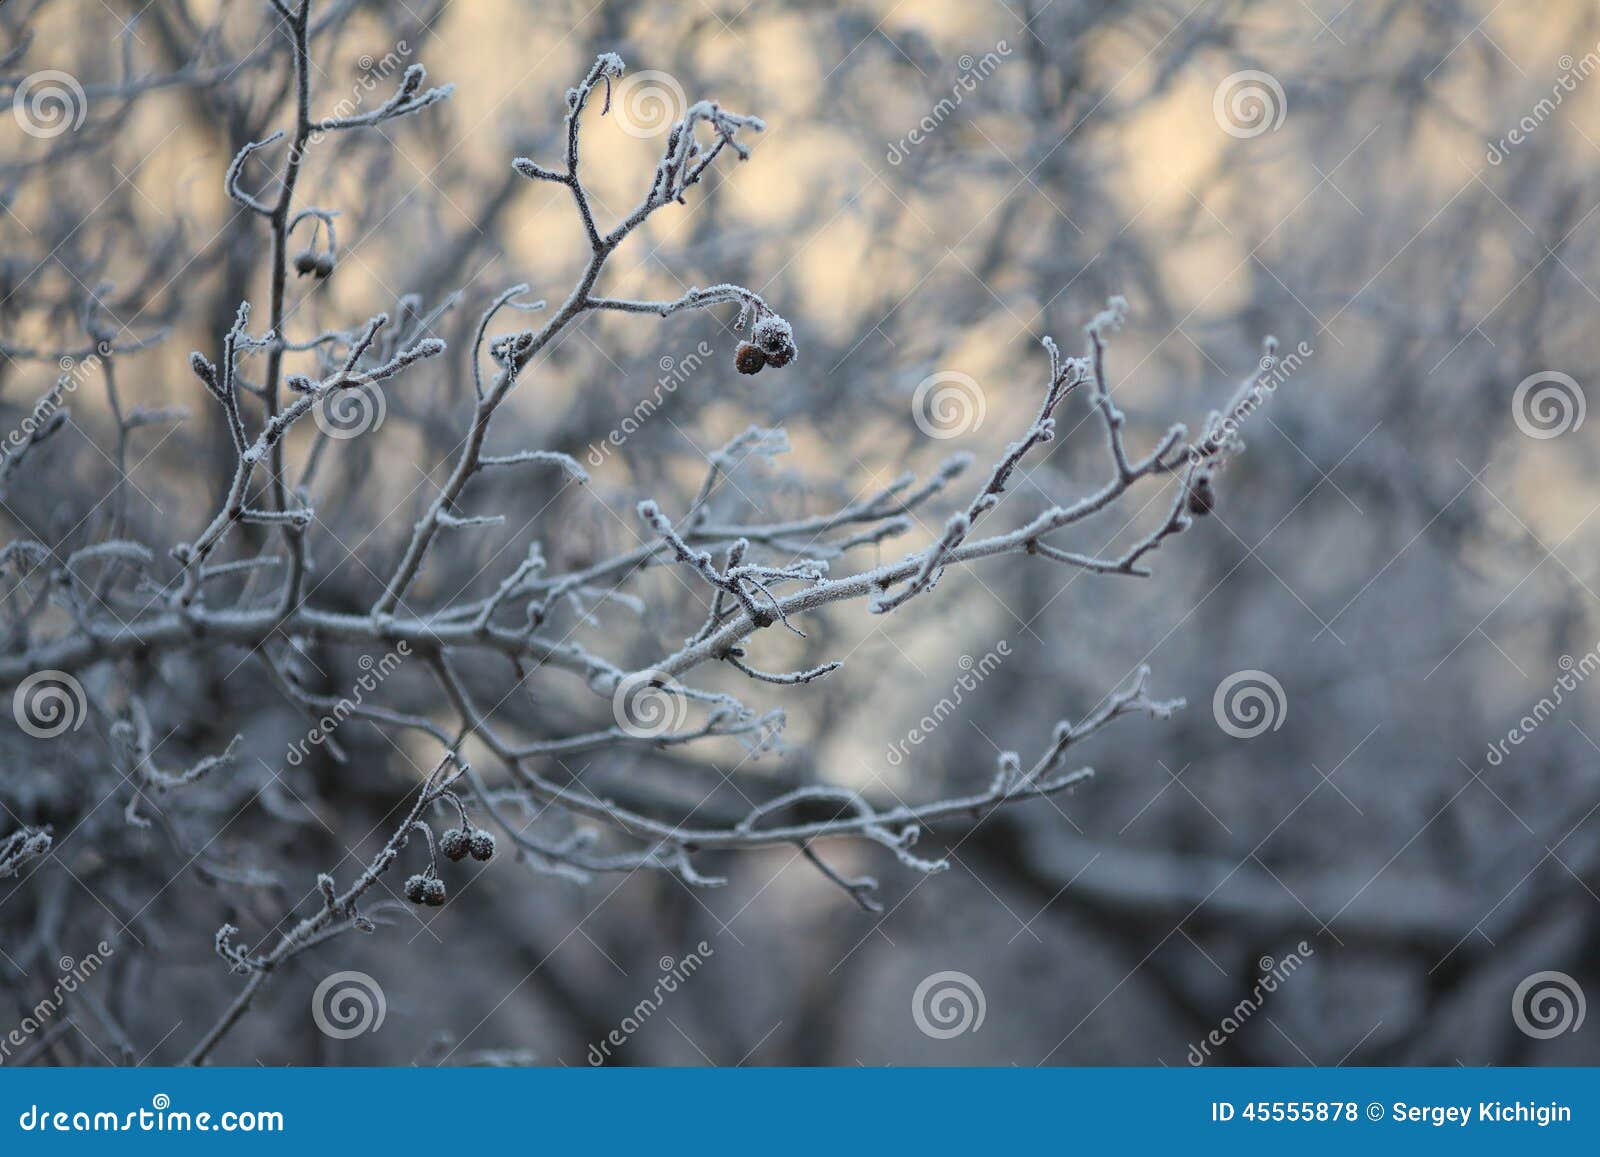 Winter Twigs and Grass Covered with Frost and Snow Stock Photo - Image ...